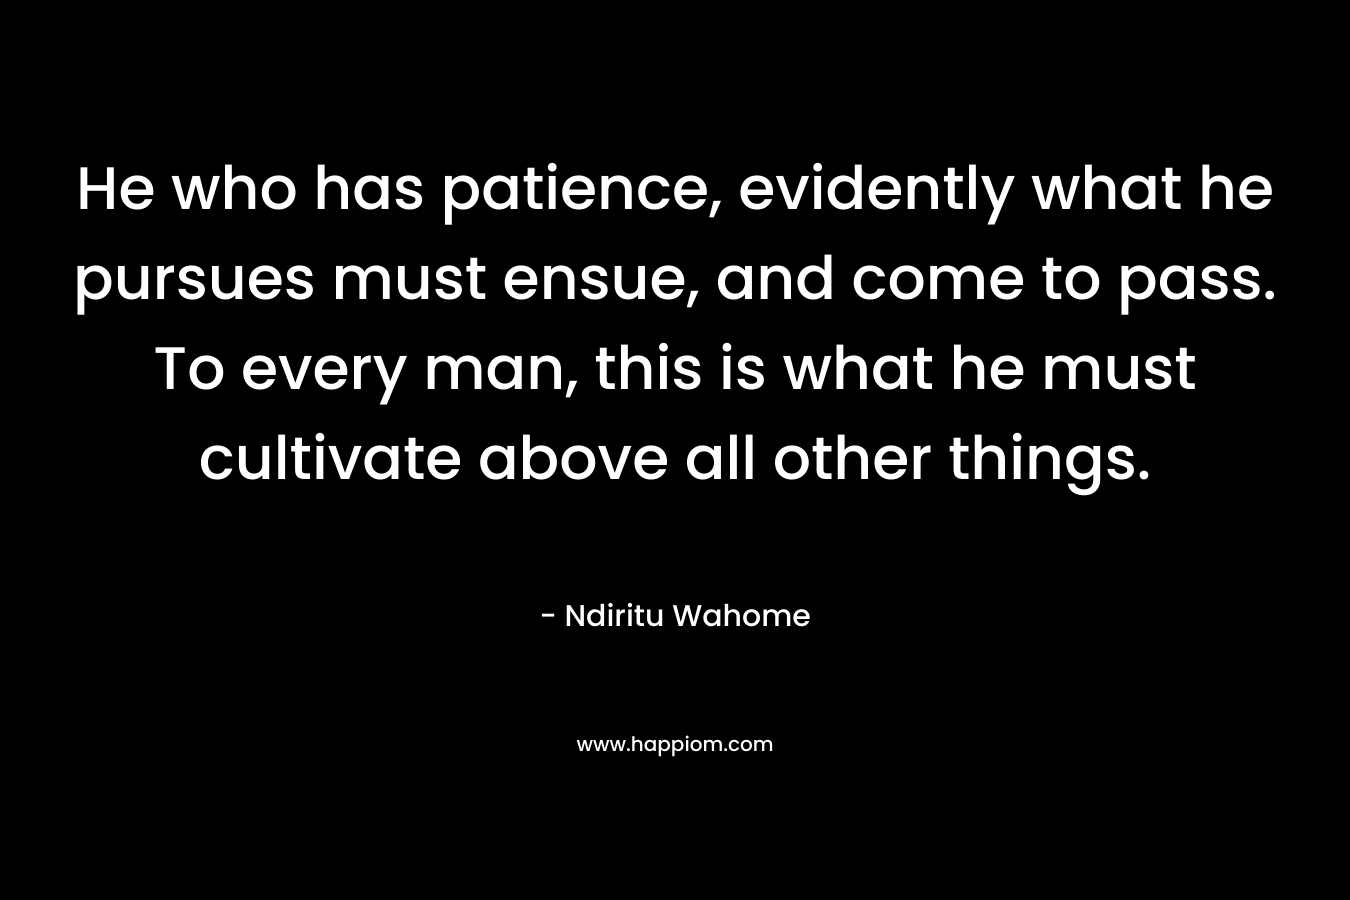 He who has patience, evidently what he pursues must ensue, and come to pass. To every man, this is what he must cultivate above all other things. – Ndiritu Wahome